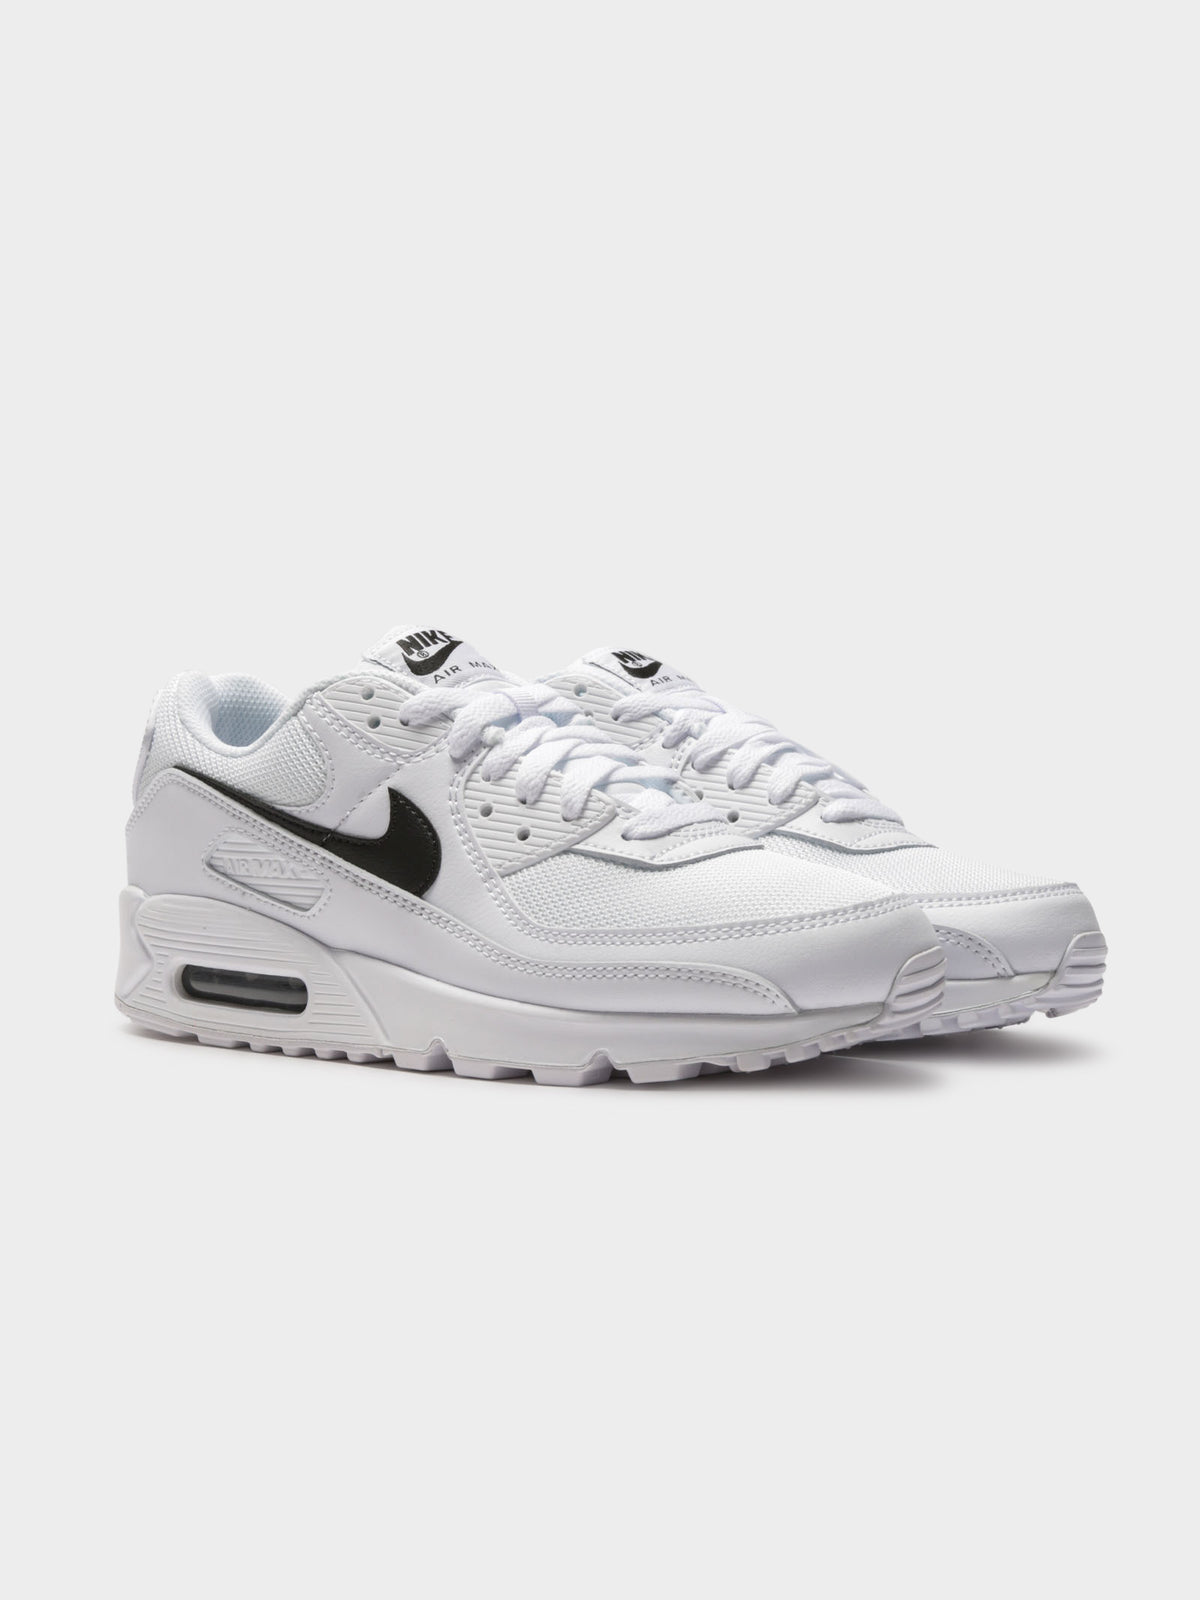 Womens Air Max 90 Sneakers in White &amp; Black